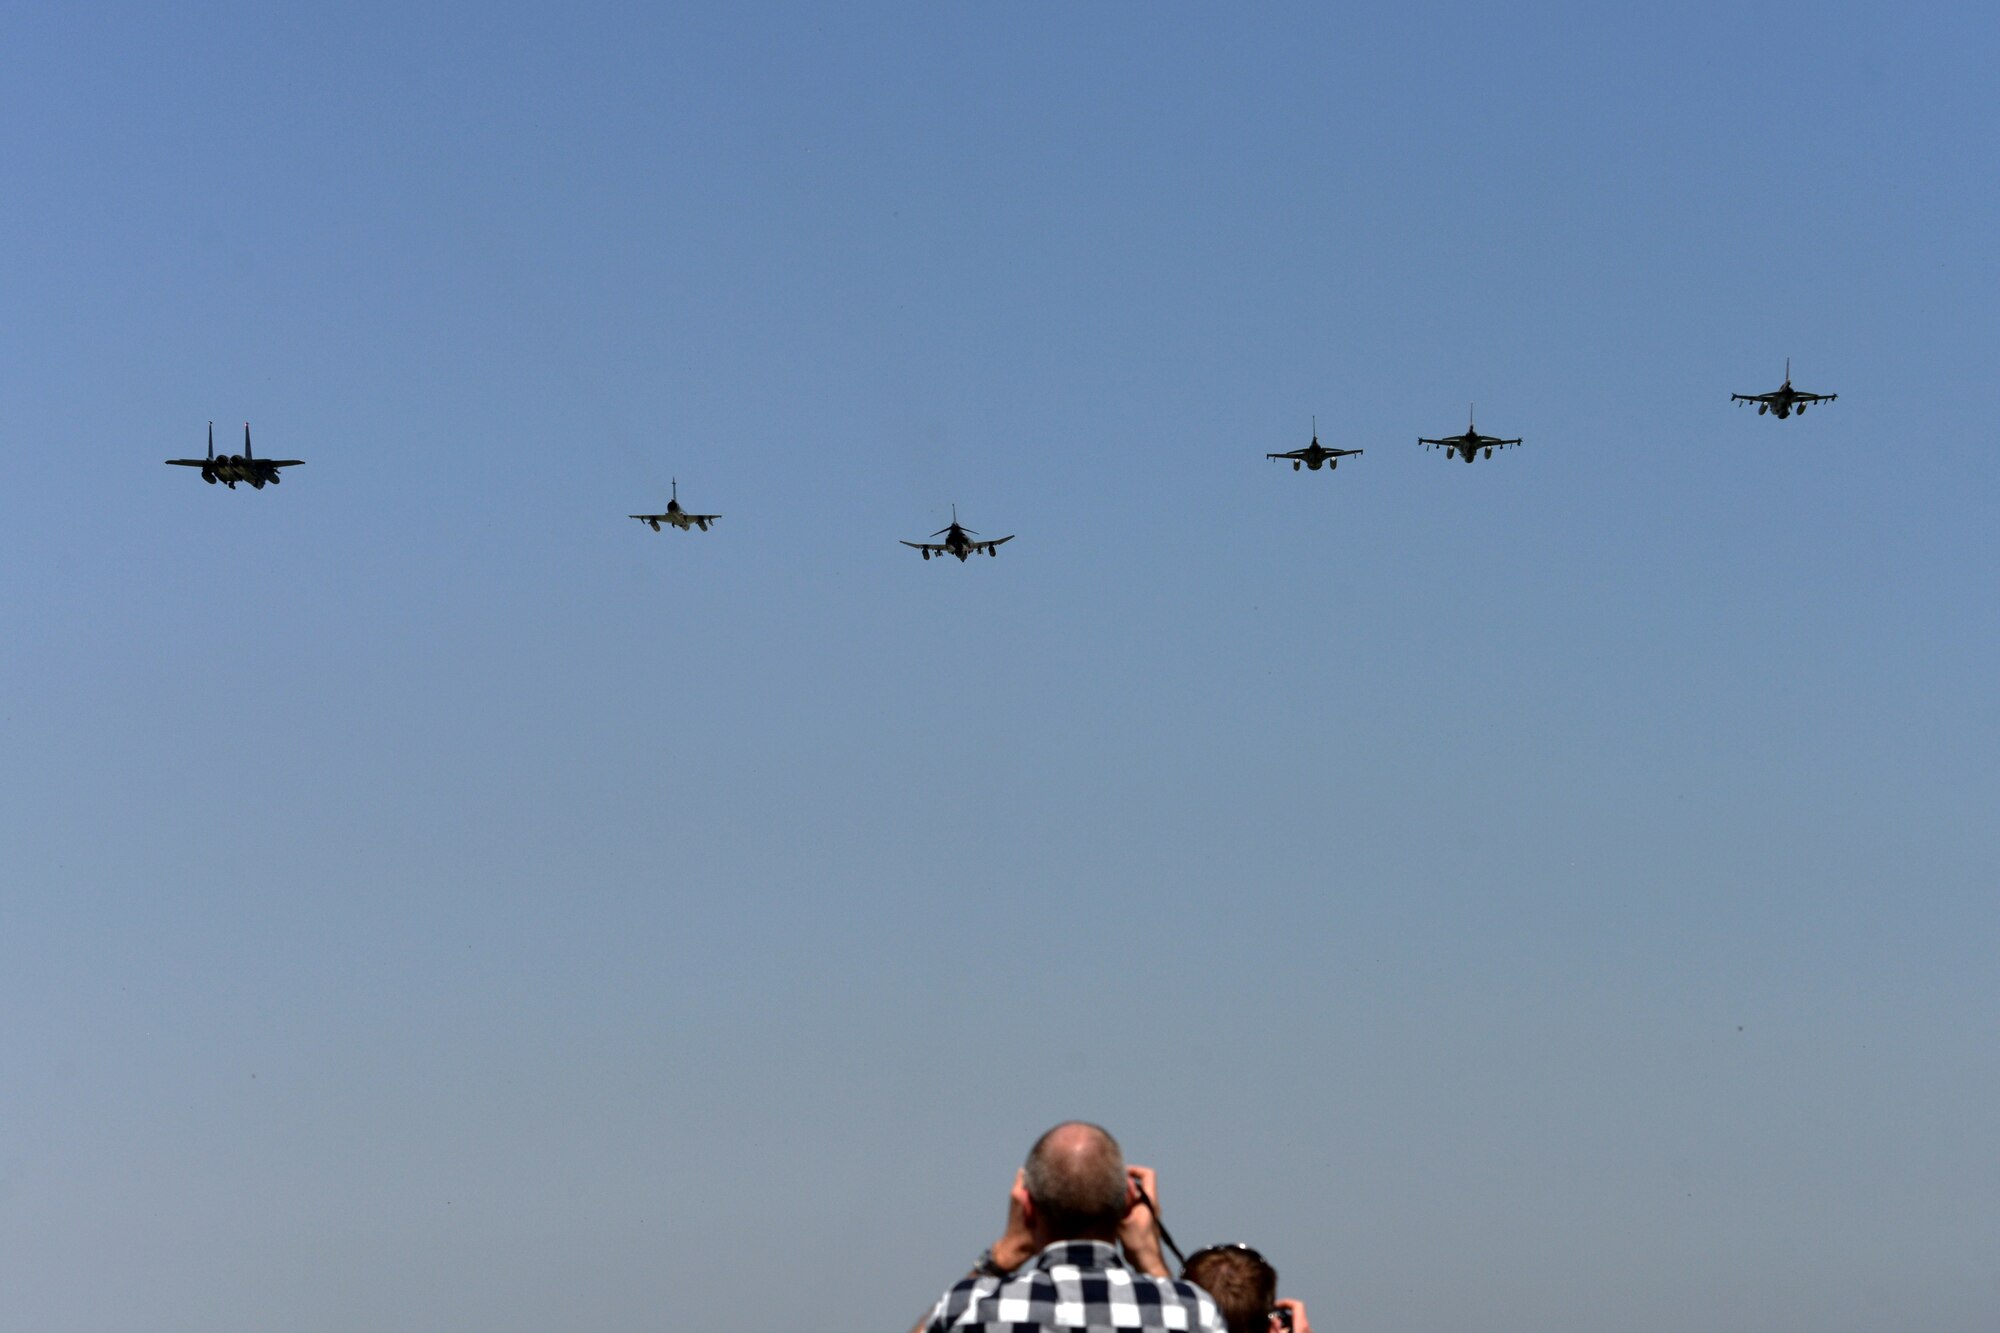 International media members take photos of a formation of aircraft from Hellenic, Israeli, and U.S. air forces, April 6, 2016, during exercise INIOHOS 16 at Andravida Air Base, Greece. INIOHOS 16 is a multi-nation exercise that enhances interoperability, capabilities, and skills amongst allied and partner air forces in the accomplishment of joint operations and air defenses, in order to maintain joint readiness and reassure regional allies and partners. (U.S. Air Force photo by Tech. Sgt. Eric Burks/Released)